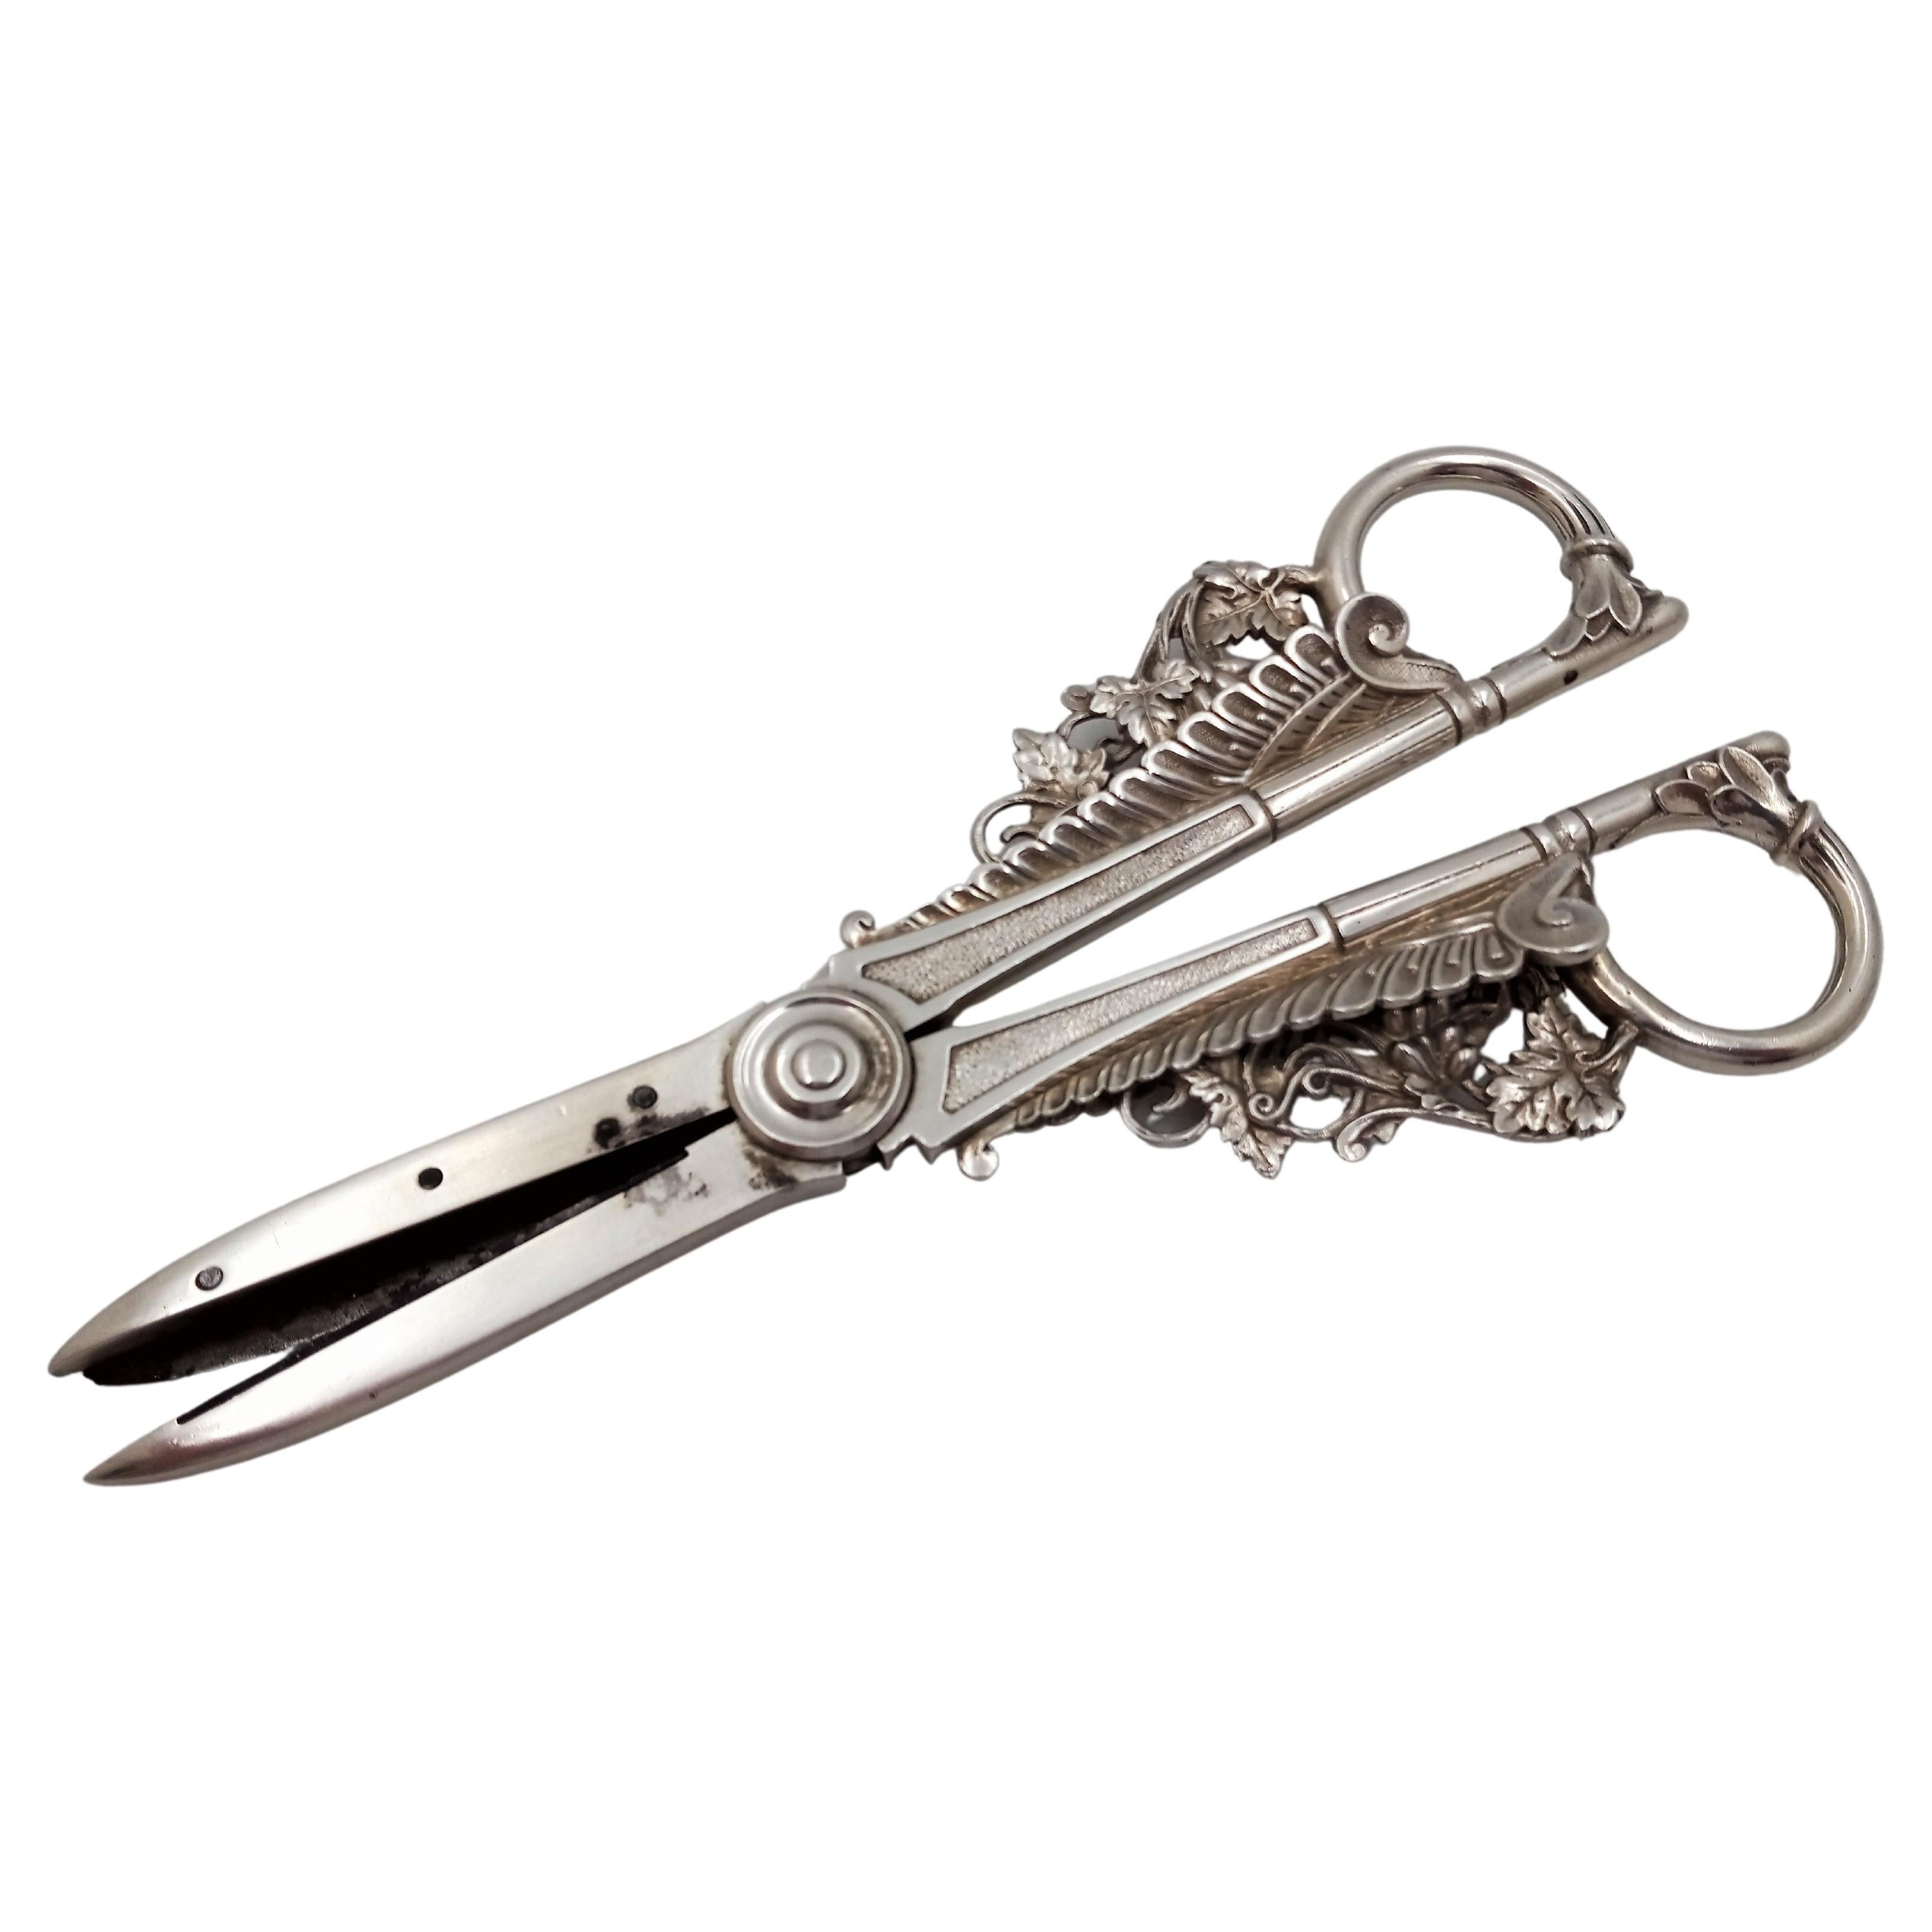 Aesthetic Ornate Grape Shears, Sterling Silver by Gorham Silversmiths, circa 1